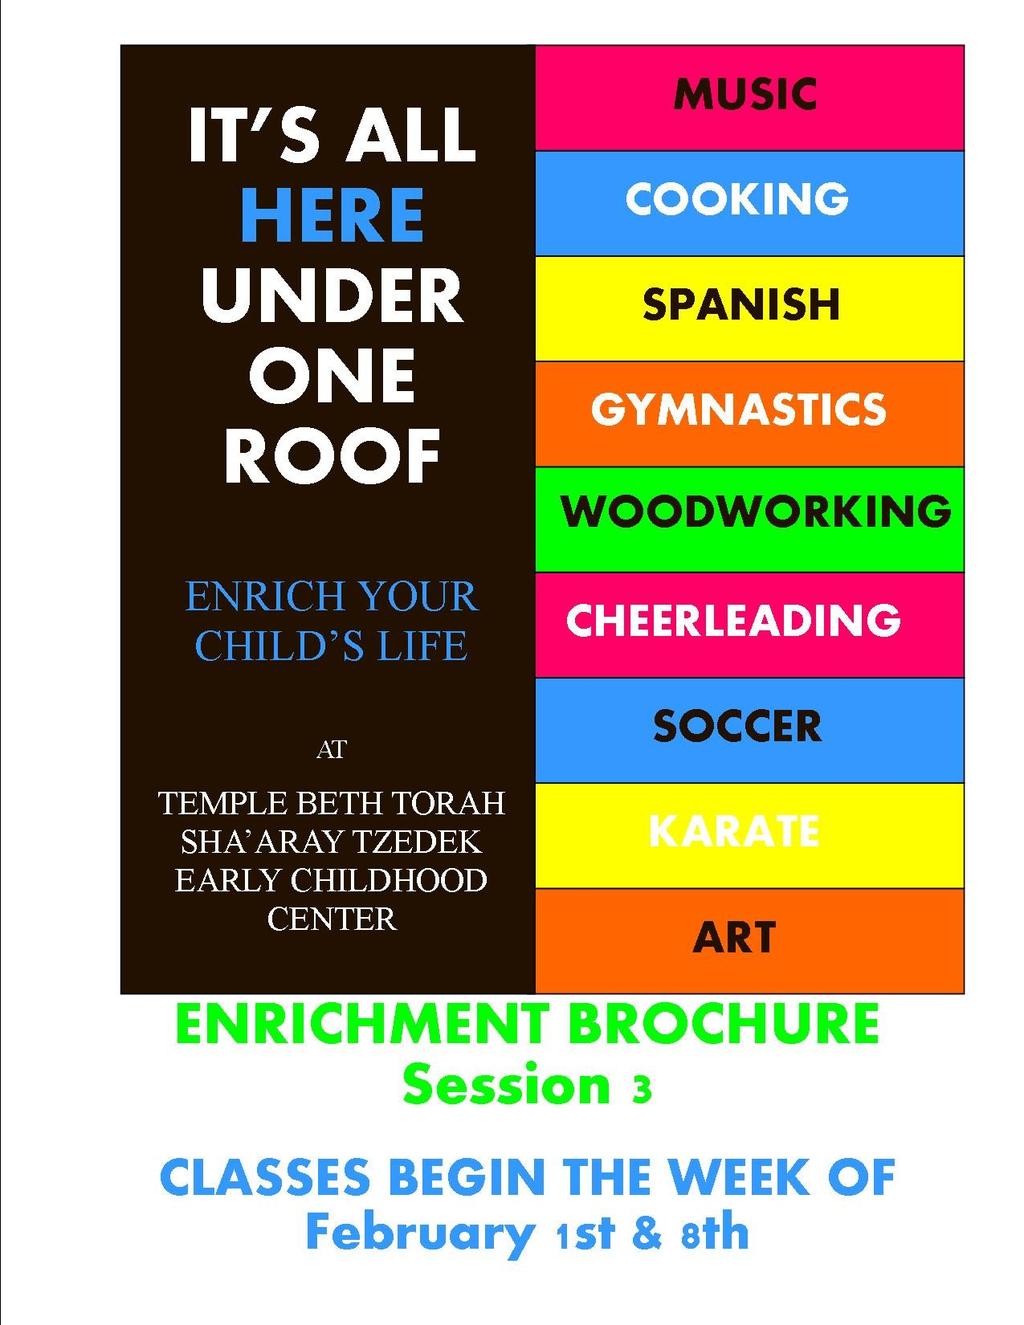 Session 3 enrichments begin the week of Feb 1st & 8th. We still have openings in a few classes. Call the front desk to enroll!